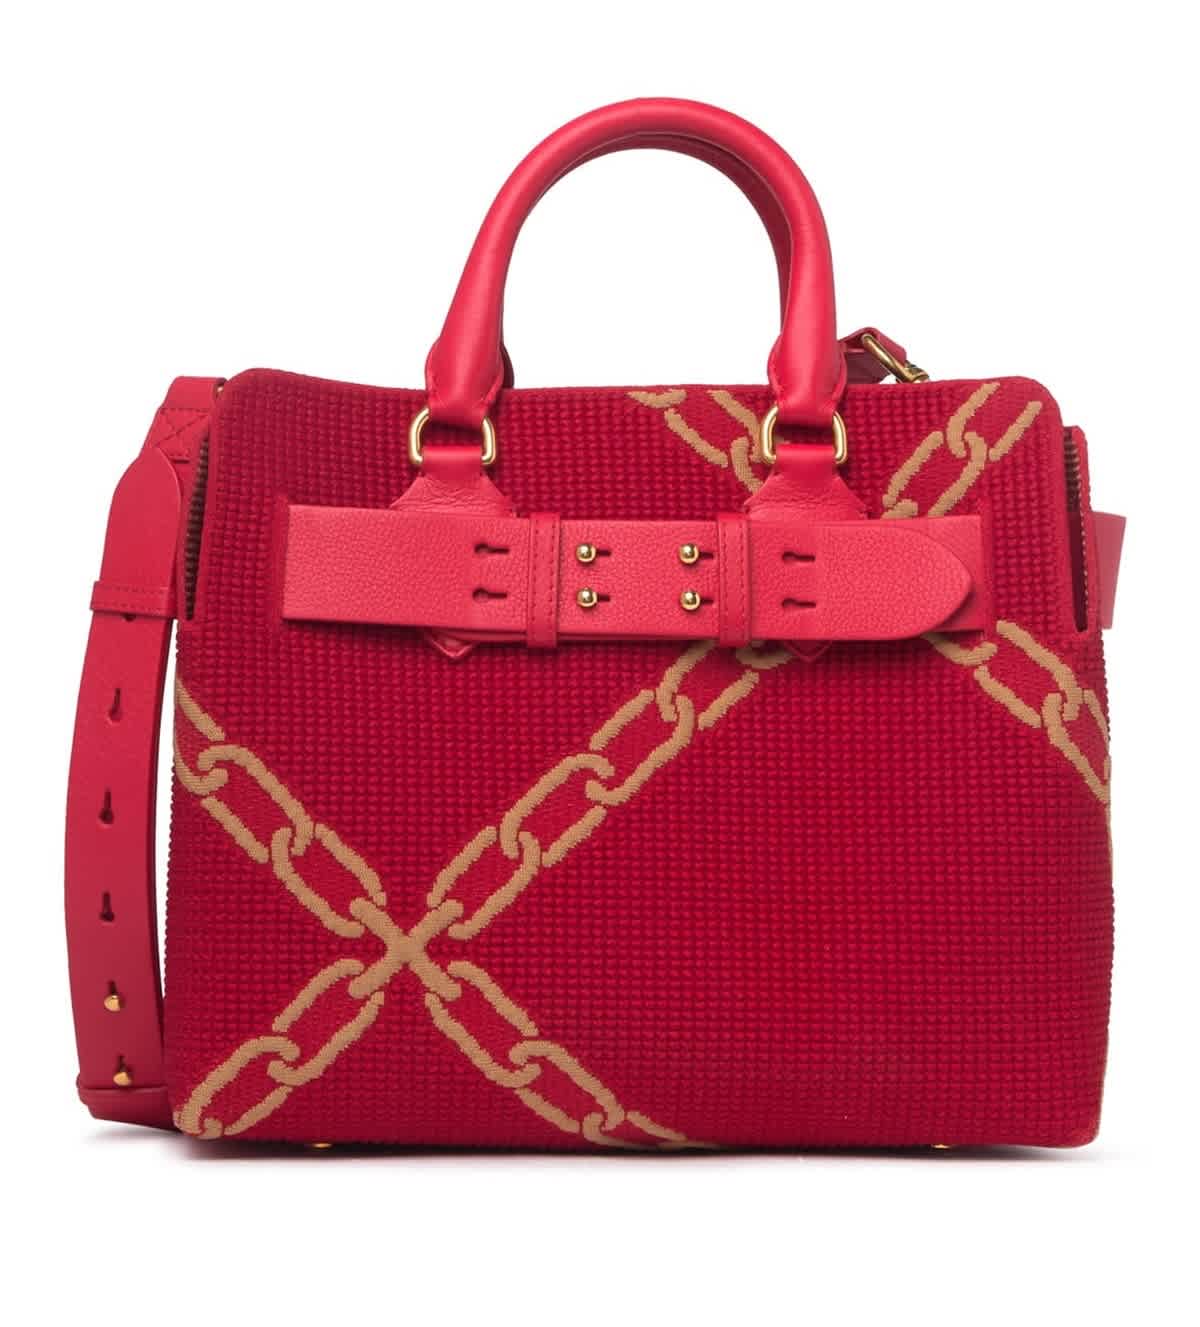 Burberry Small Knitted Link Belt Bag In Bright Red / Light Camel In Red,yellow